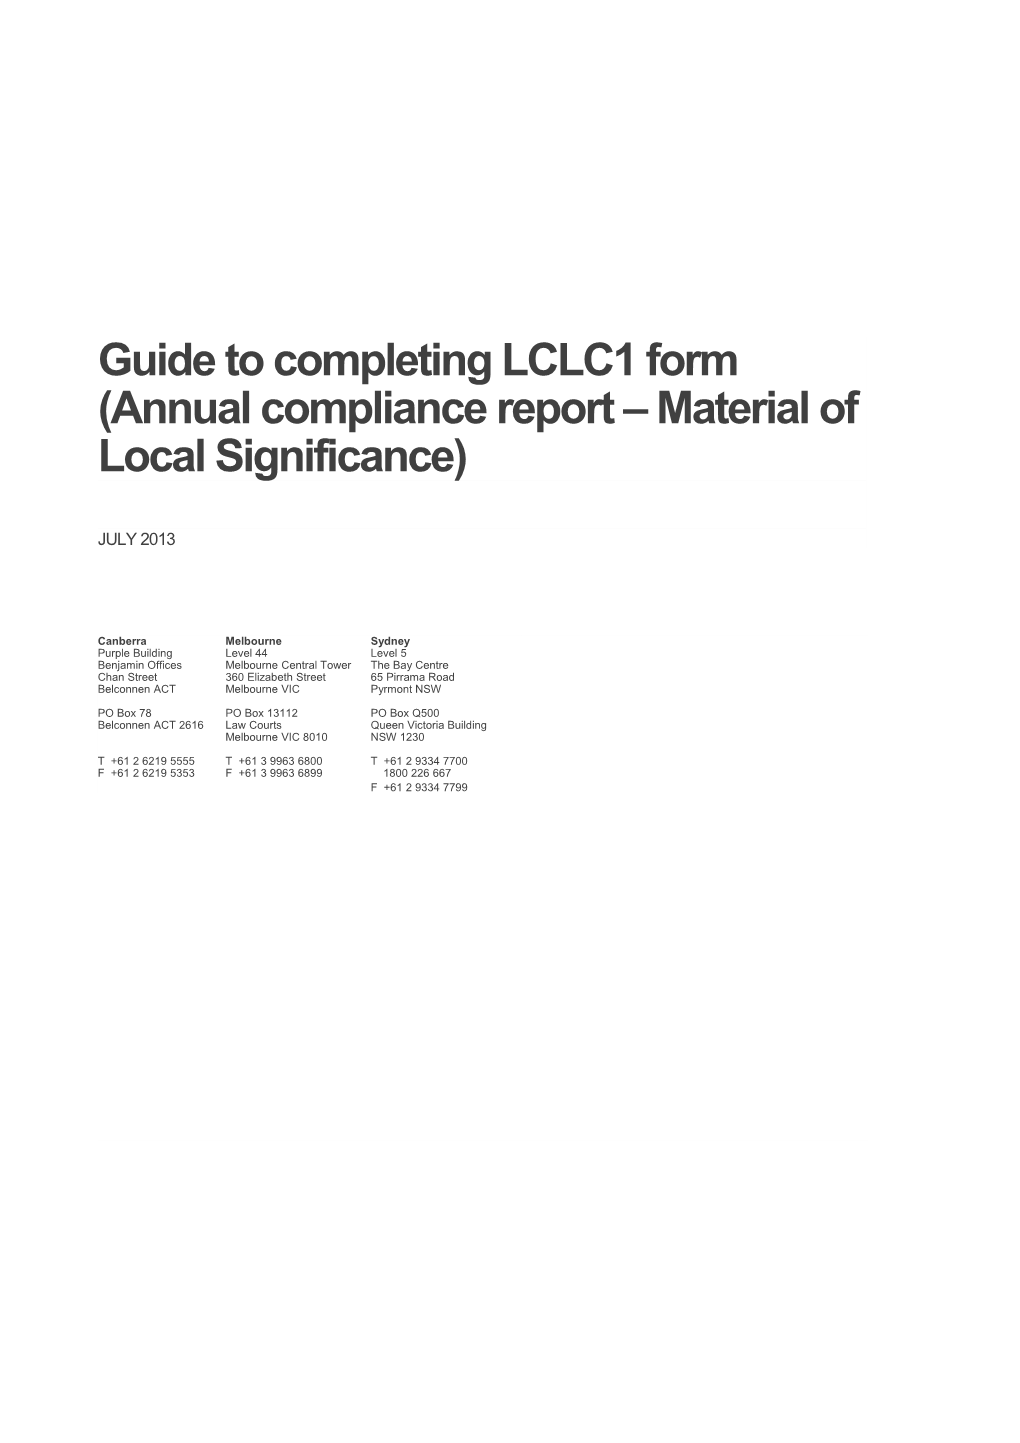 Guide to Completing LCLC1 Form